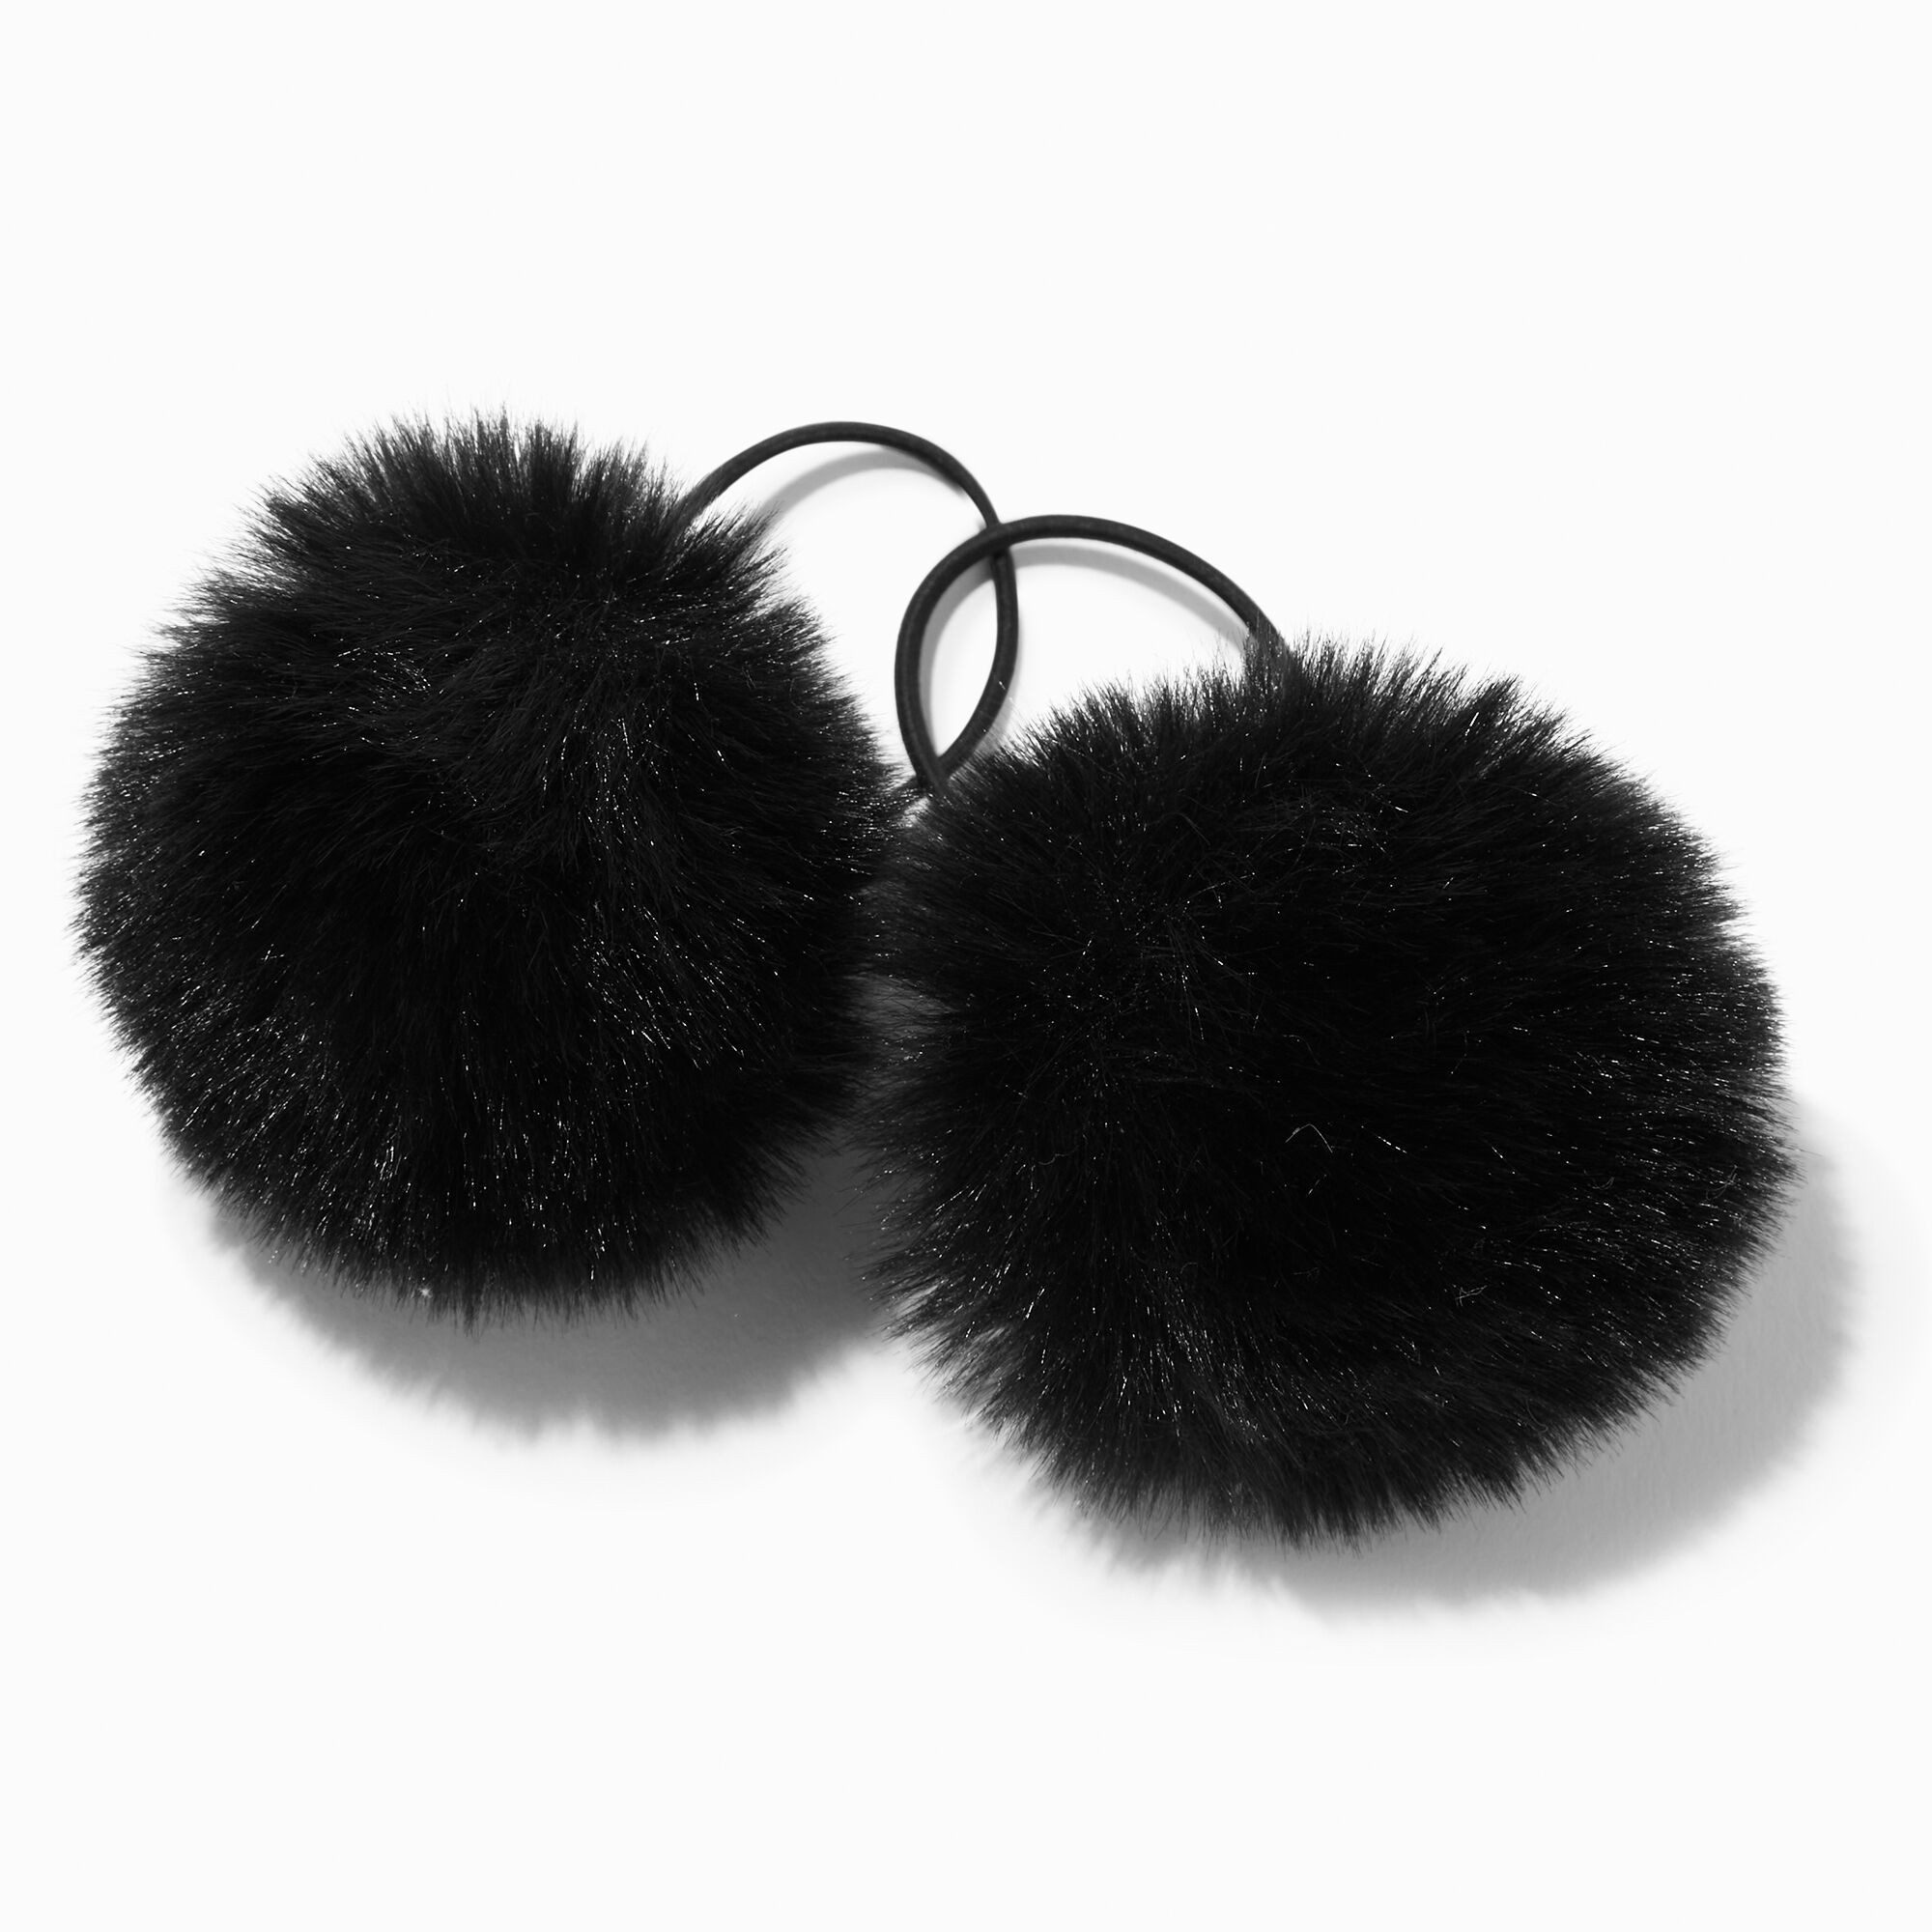 View Claires Faux Fur Pom Hair Ties 2 Pack Black information